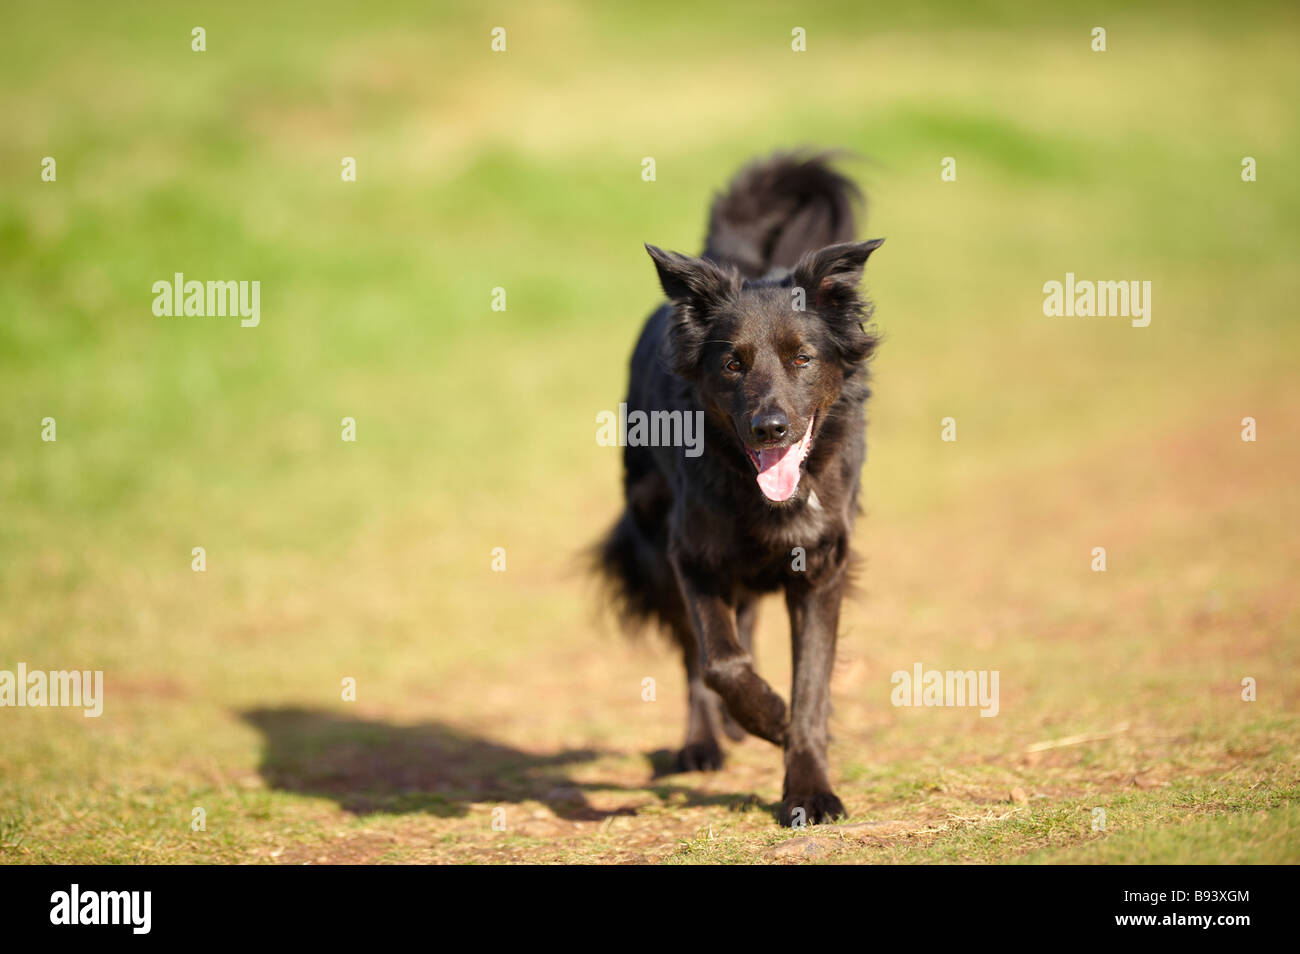 Black collie / Alsatian cross dog running with ears perked up and panting outside in sunshine Stock Photo